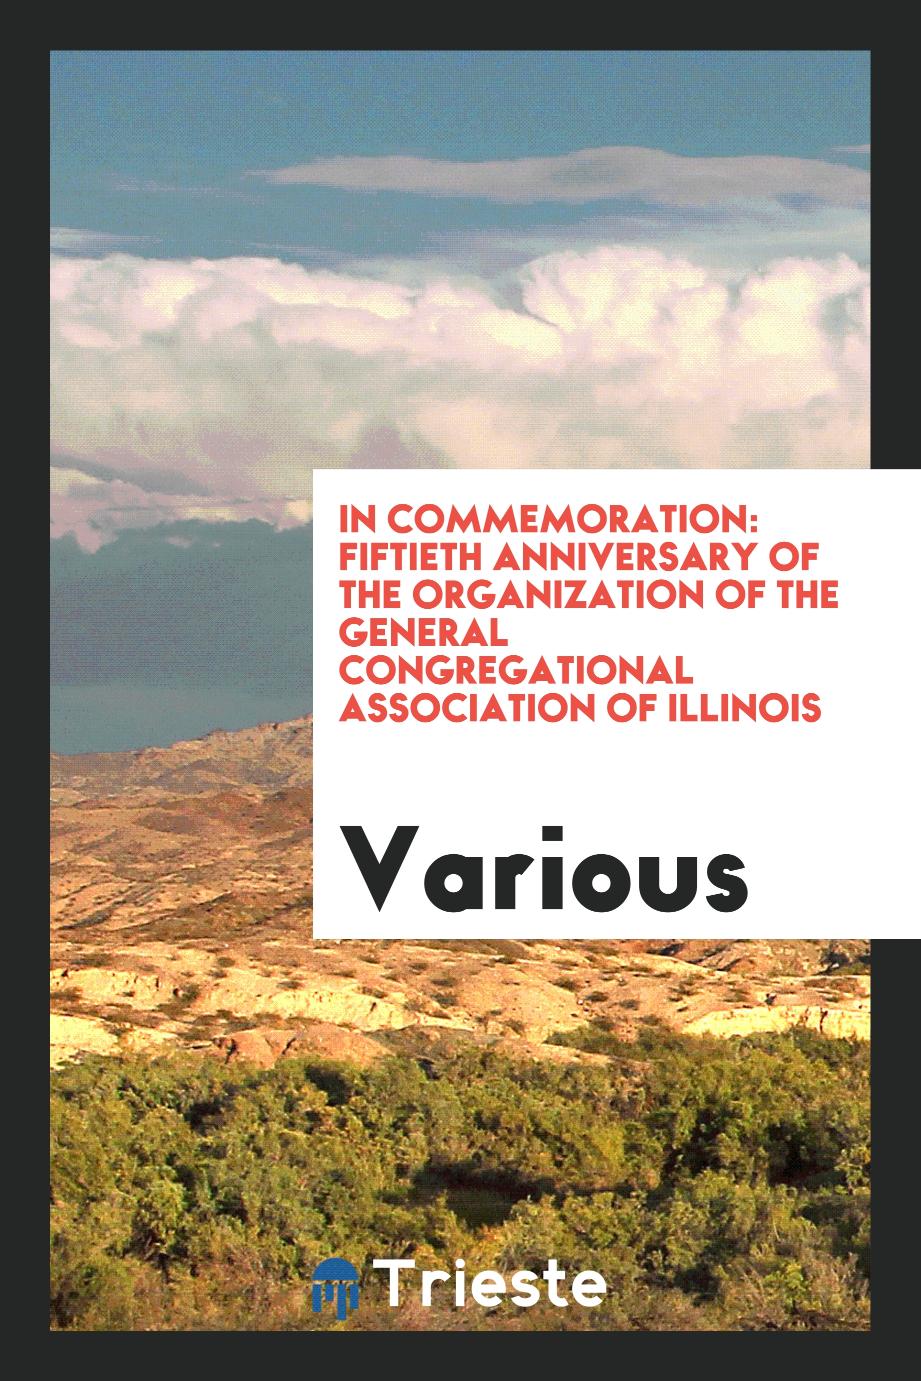 In Commemoration: Fiftieth Anniversary of the Organization of the General Congregational Association of Illinois